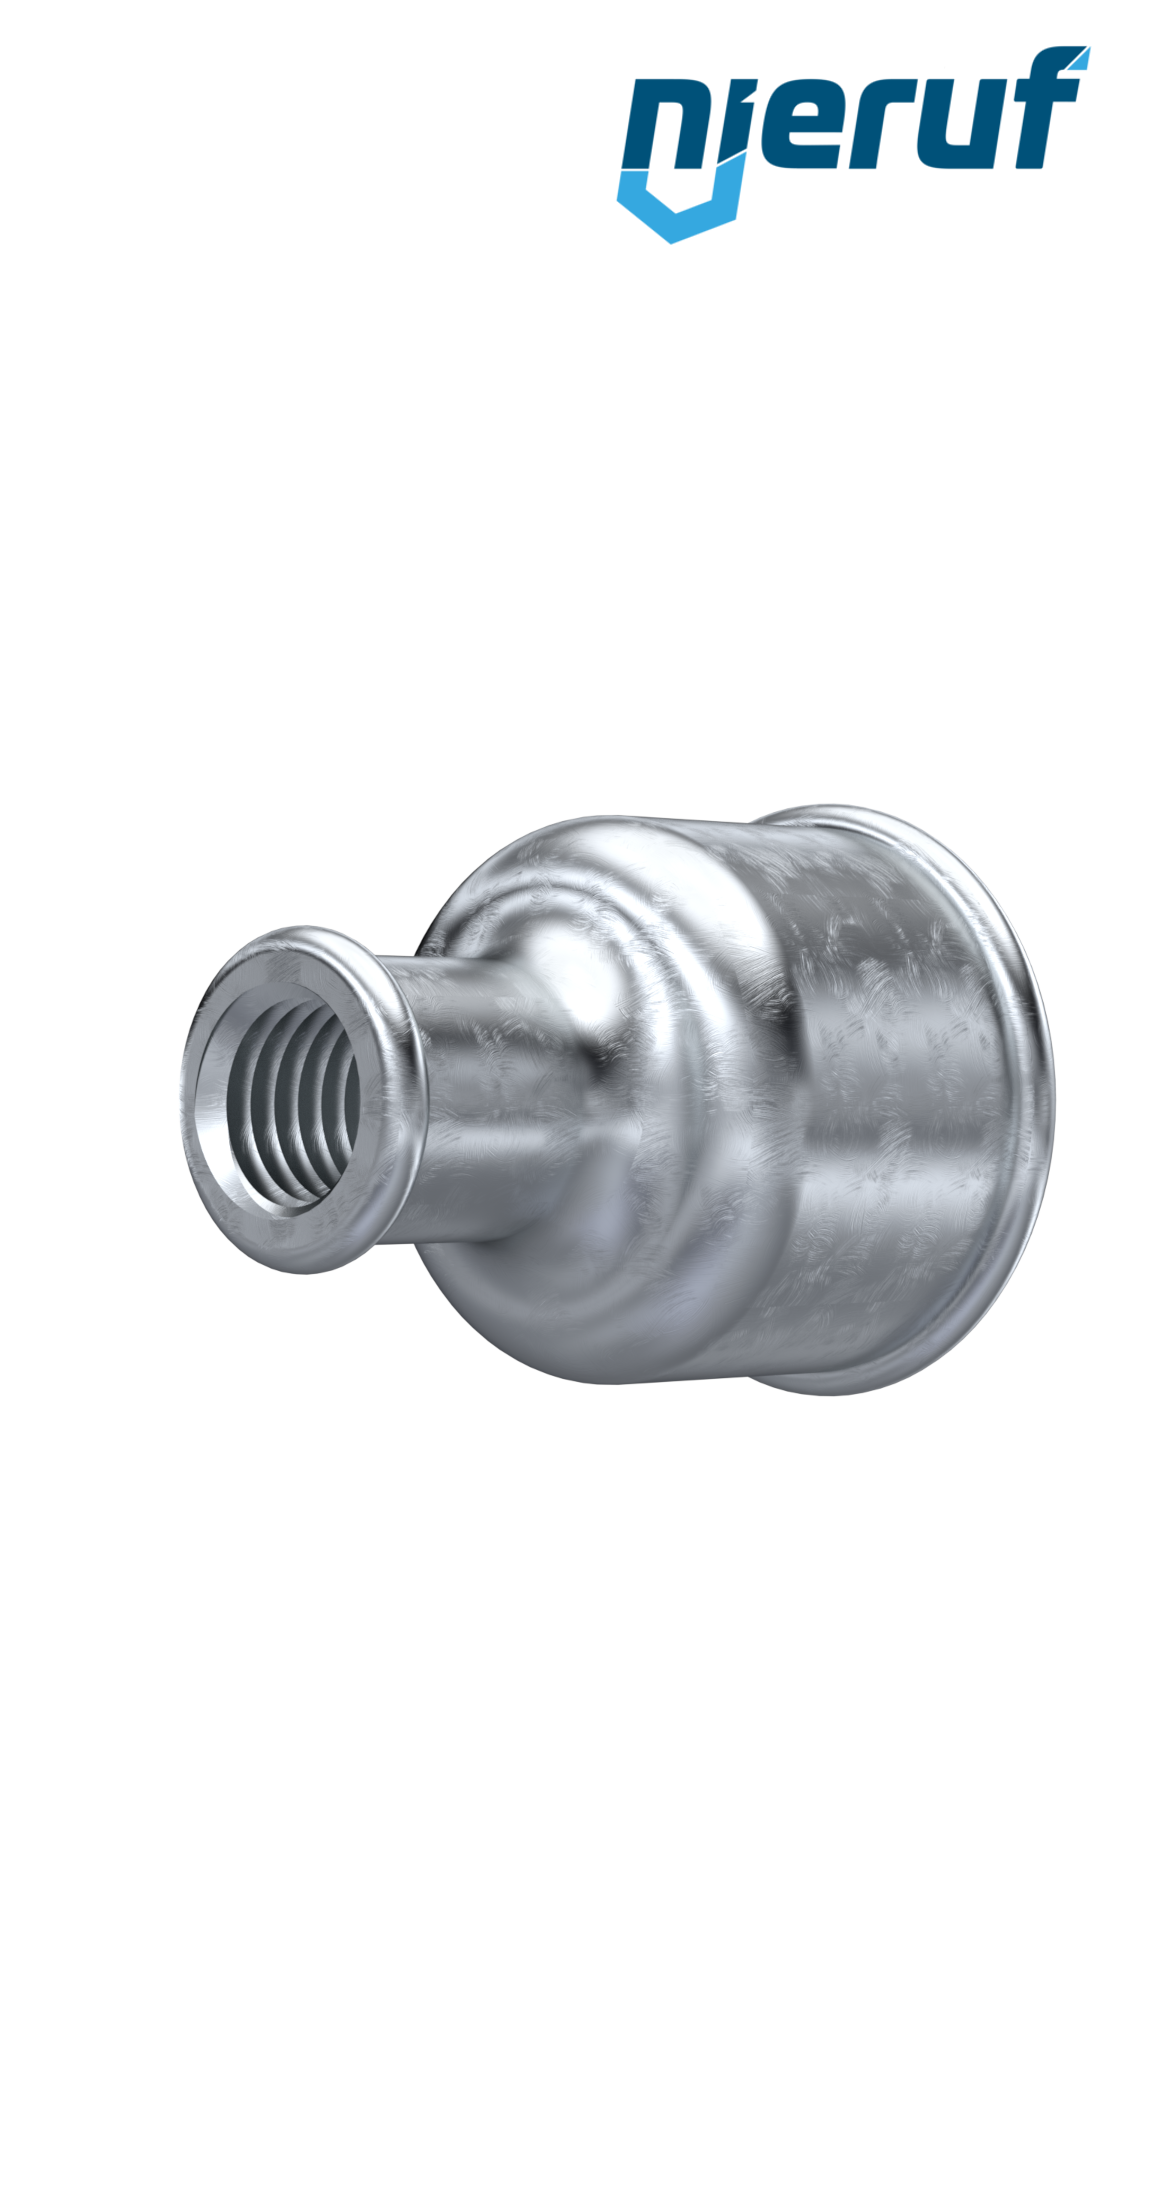 Malleable cast iron fitting reducing socket no. 240, 1" x 1/2" inch galvanized